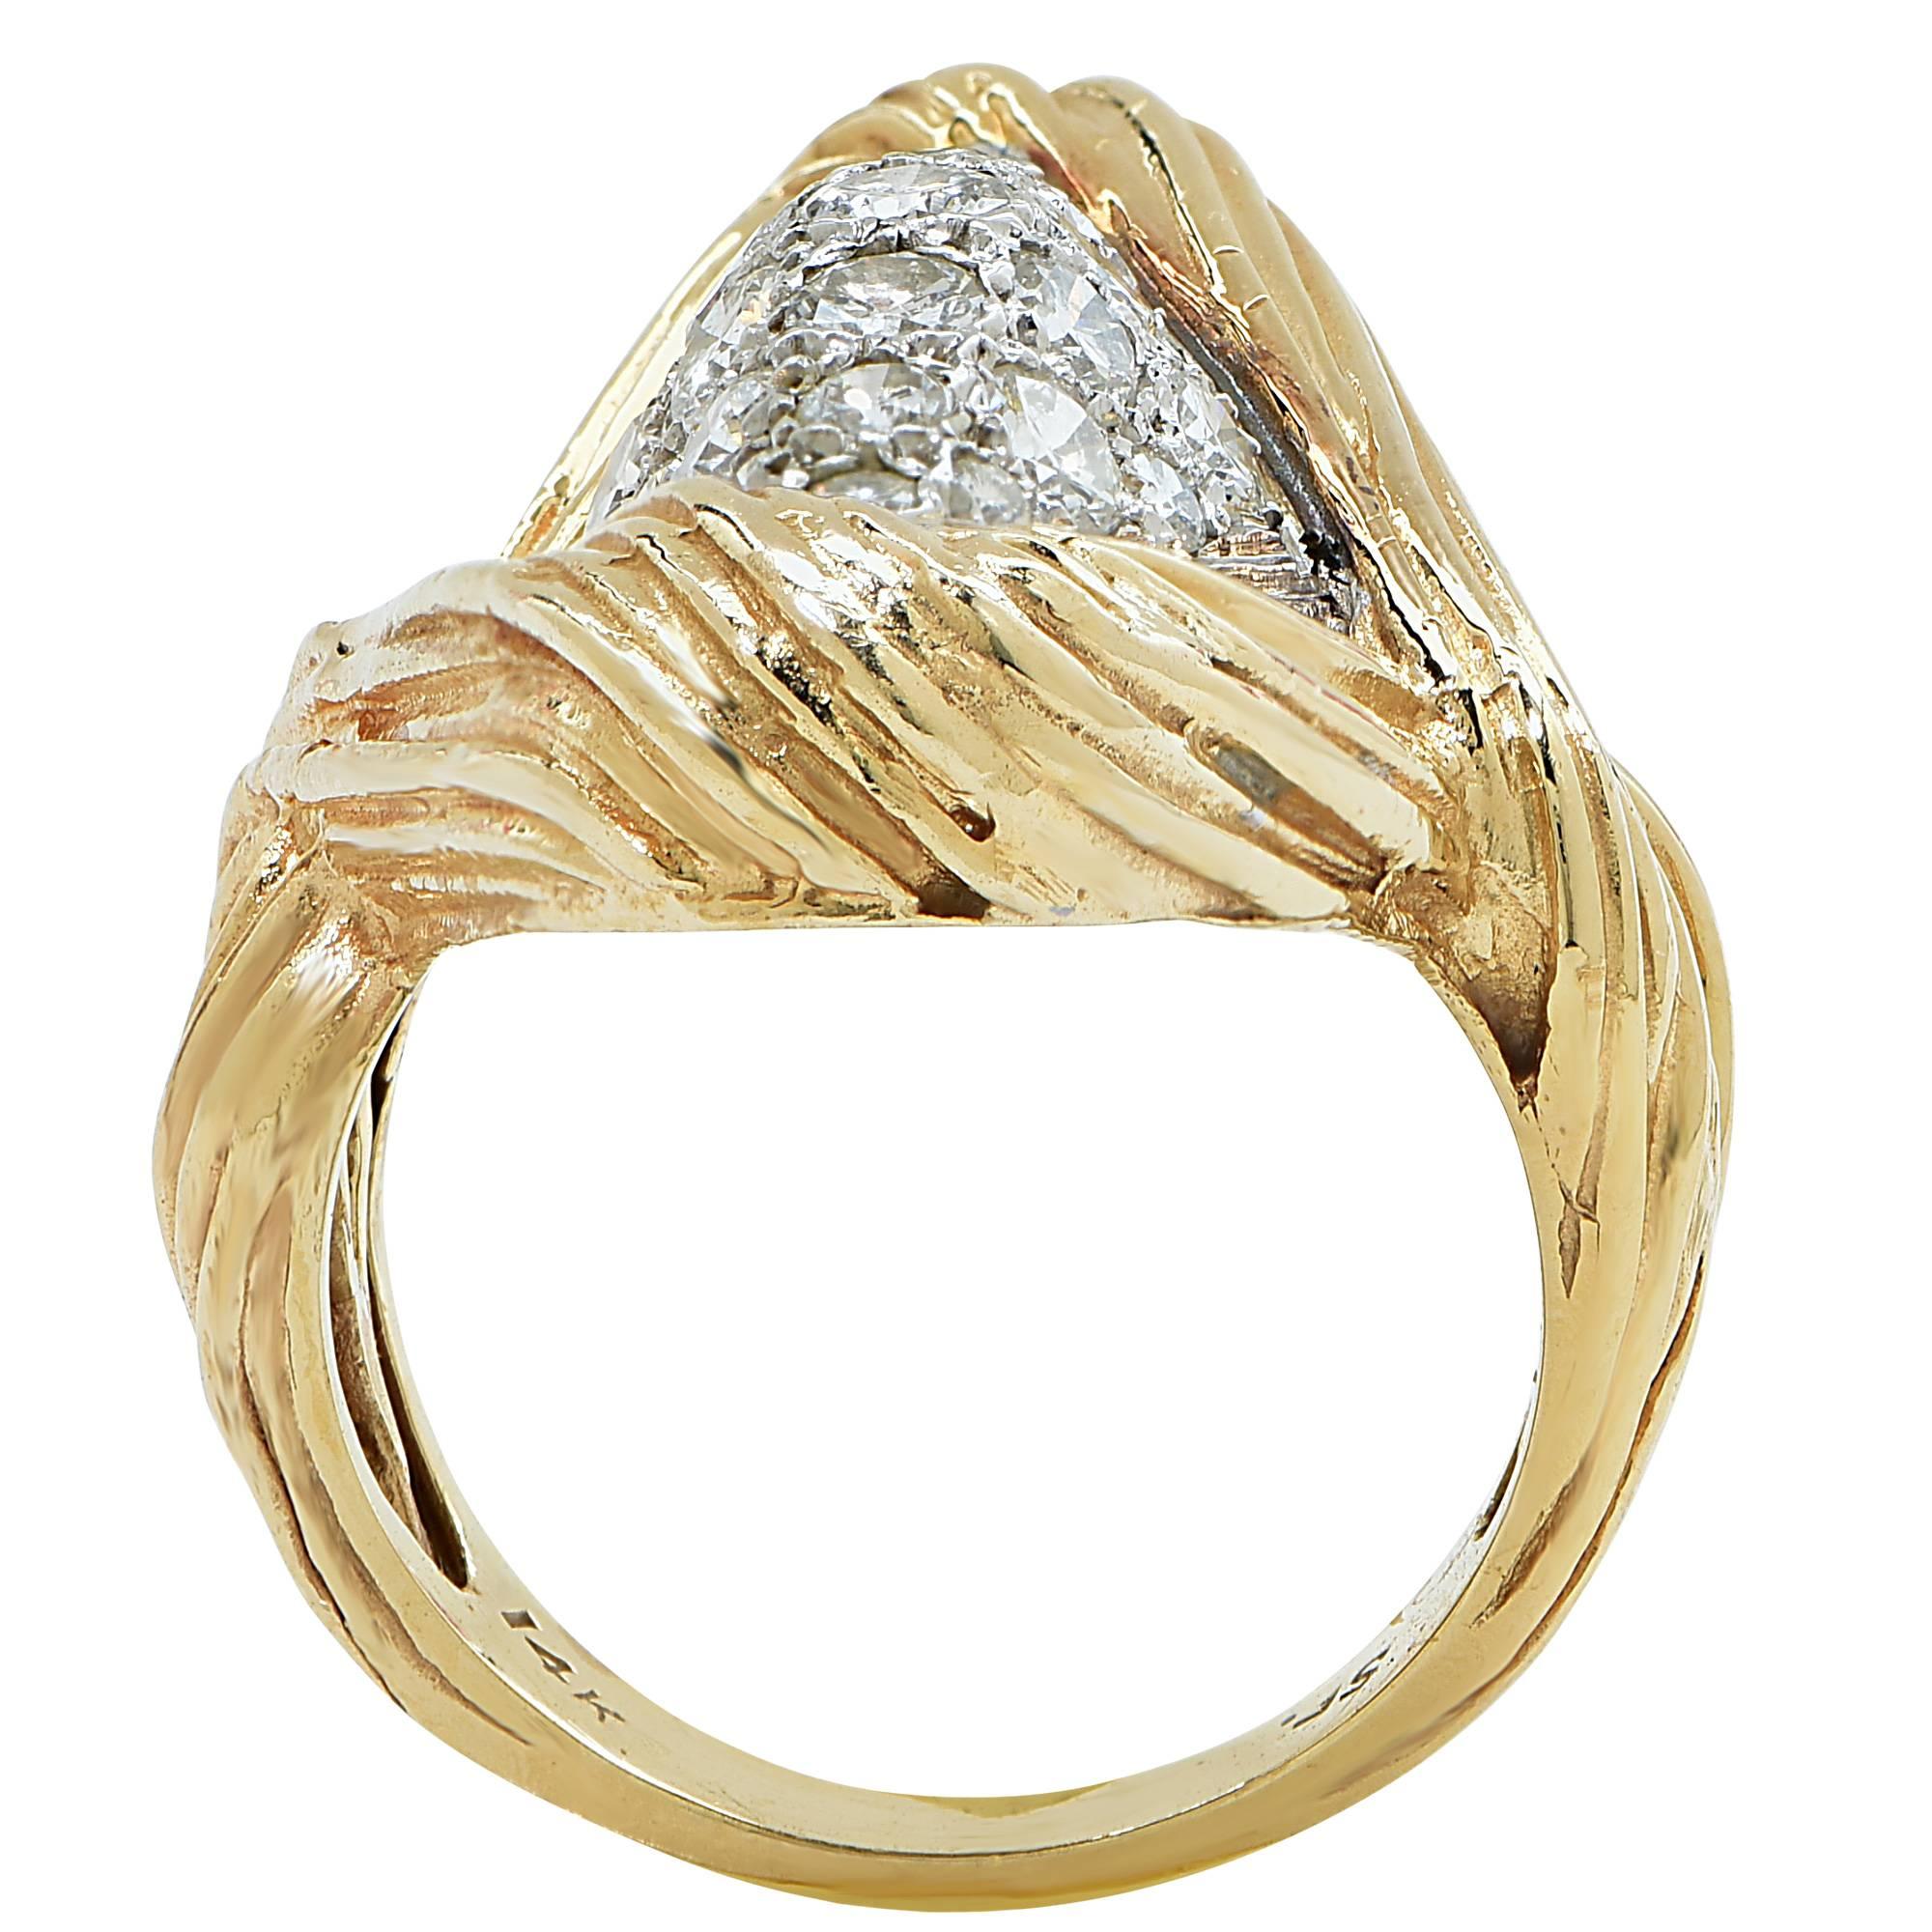 Women's 1970s Sculptural Diamond Two Color Gold Ring